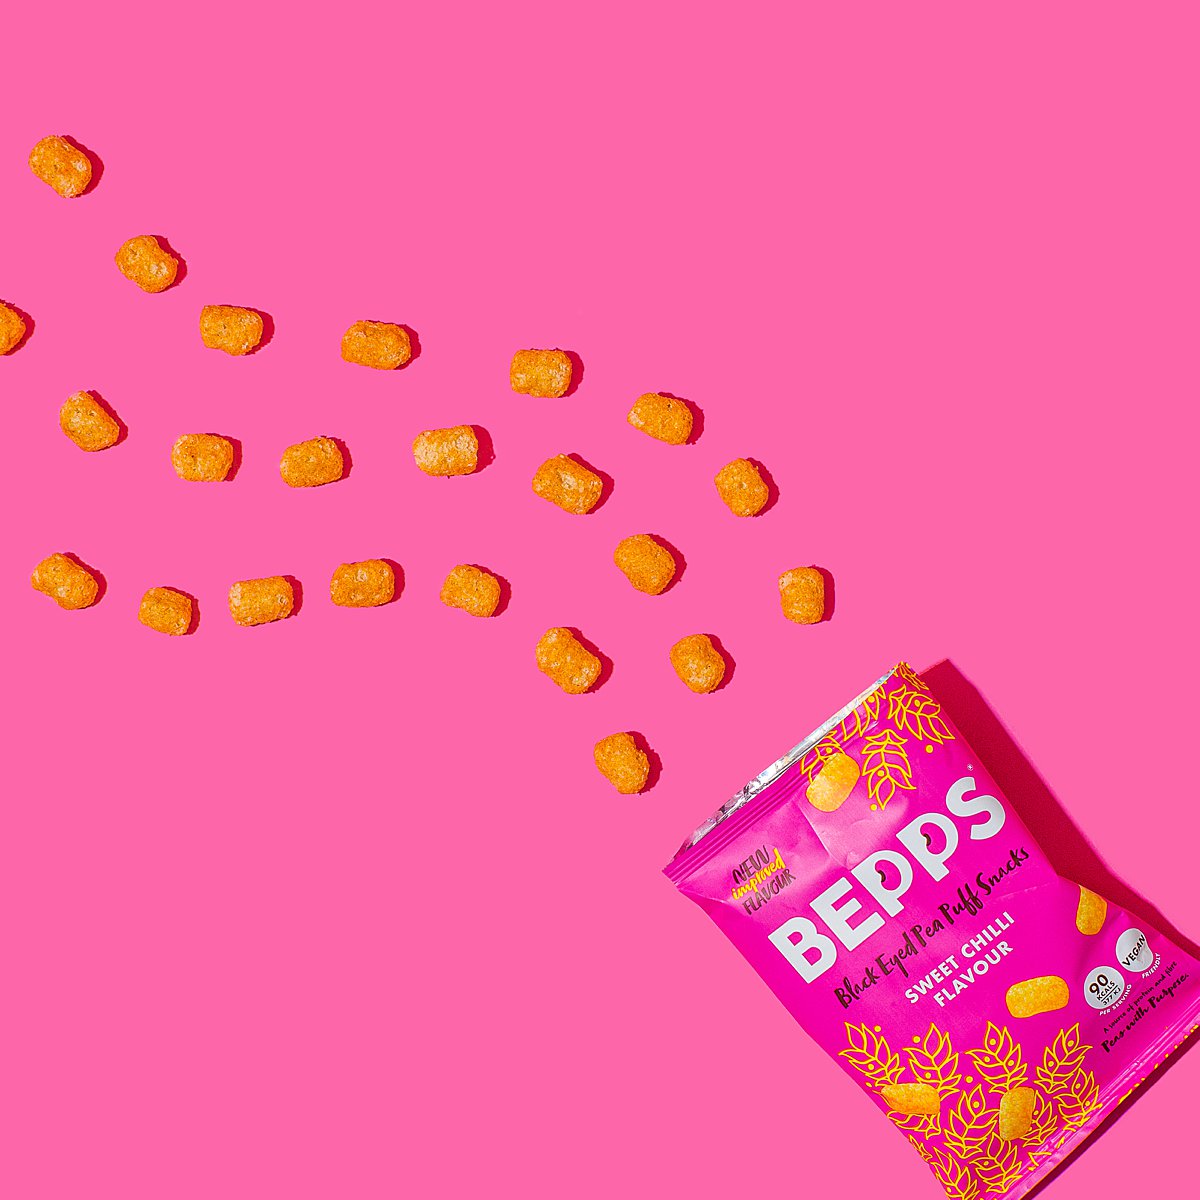 Colourful content creation for Bepps vegan snacks. Styled product and lifestyle photography by Marianne Taylor.